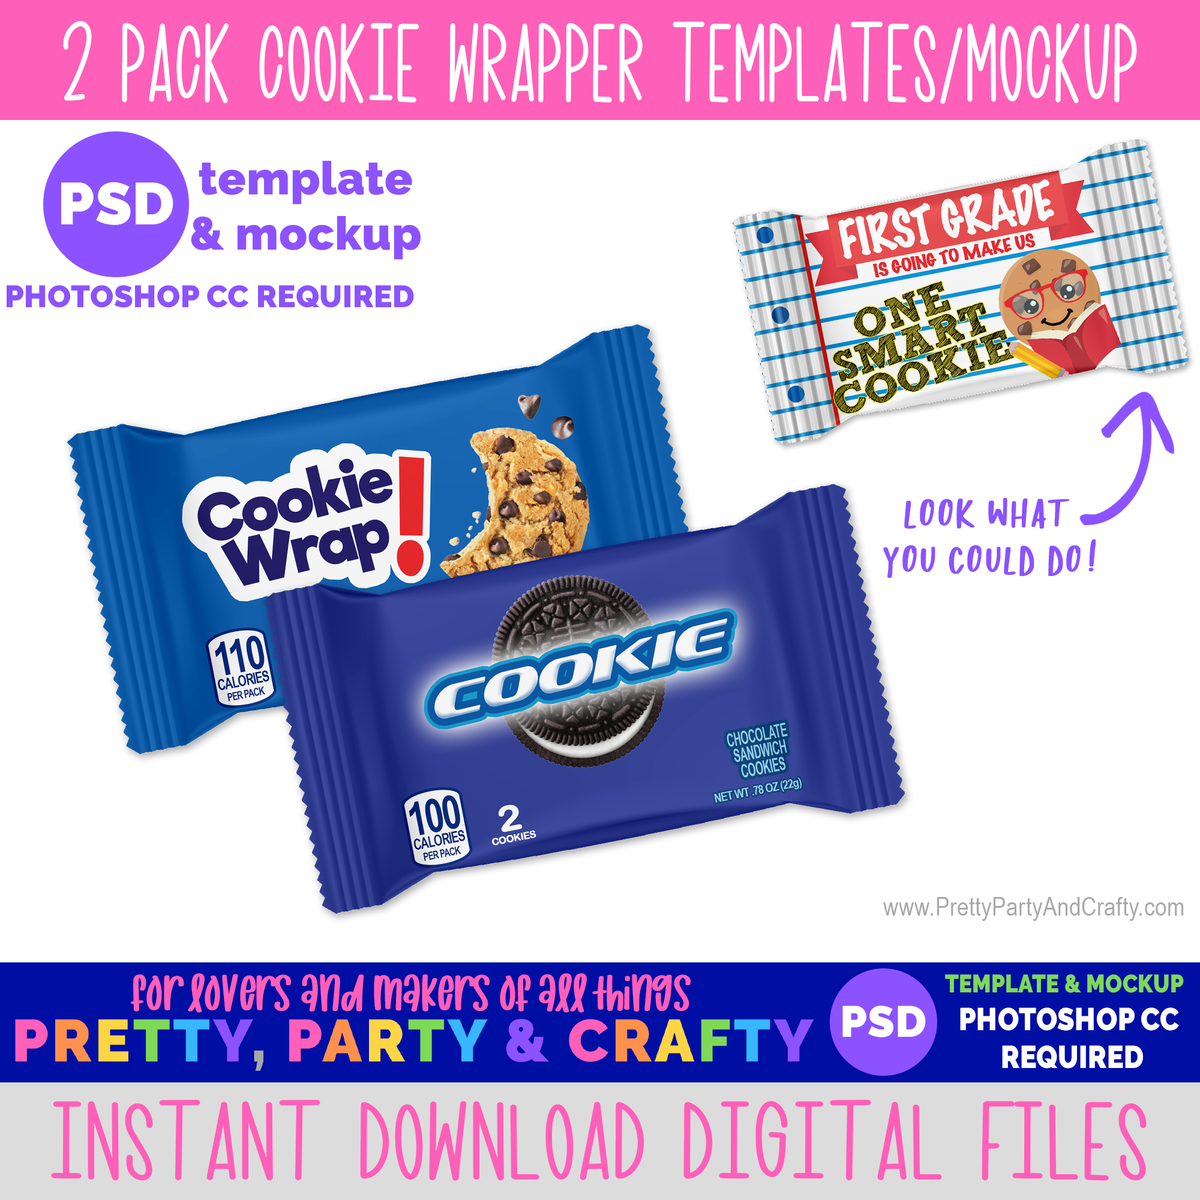 2 Pack Cookies Wrapper Template and Mockup -PHOTOSHOP